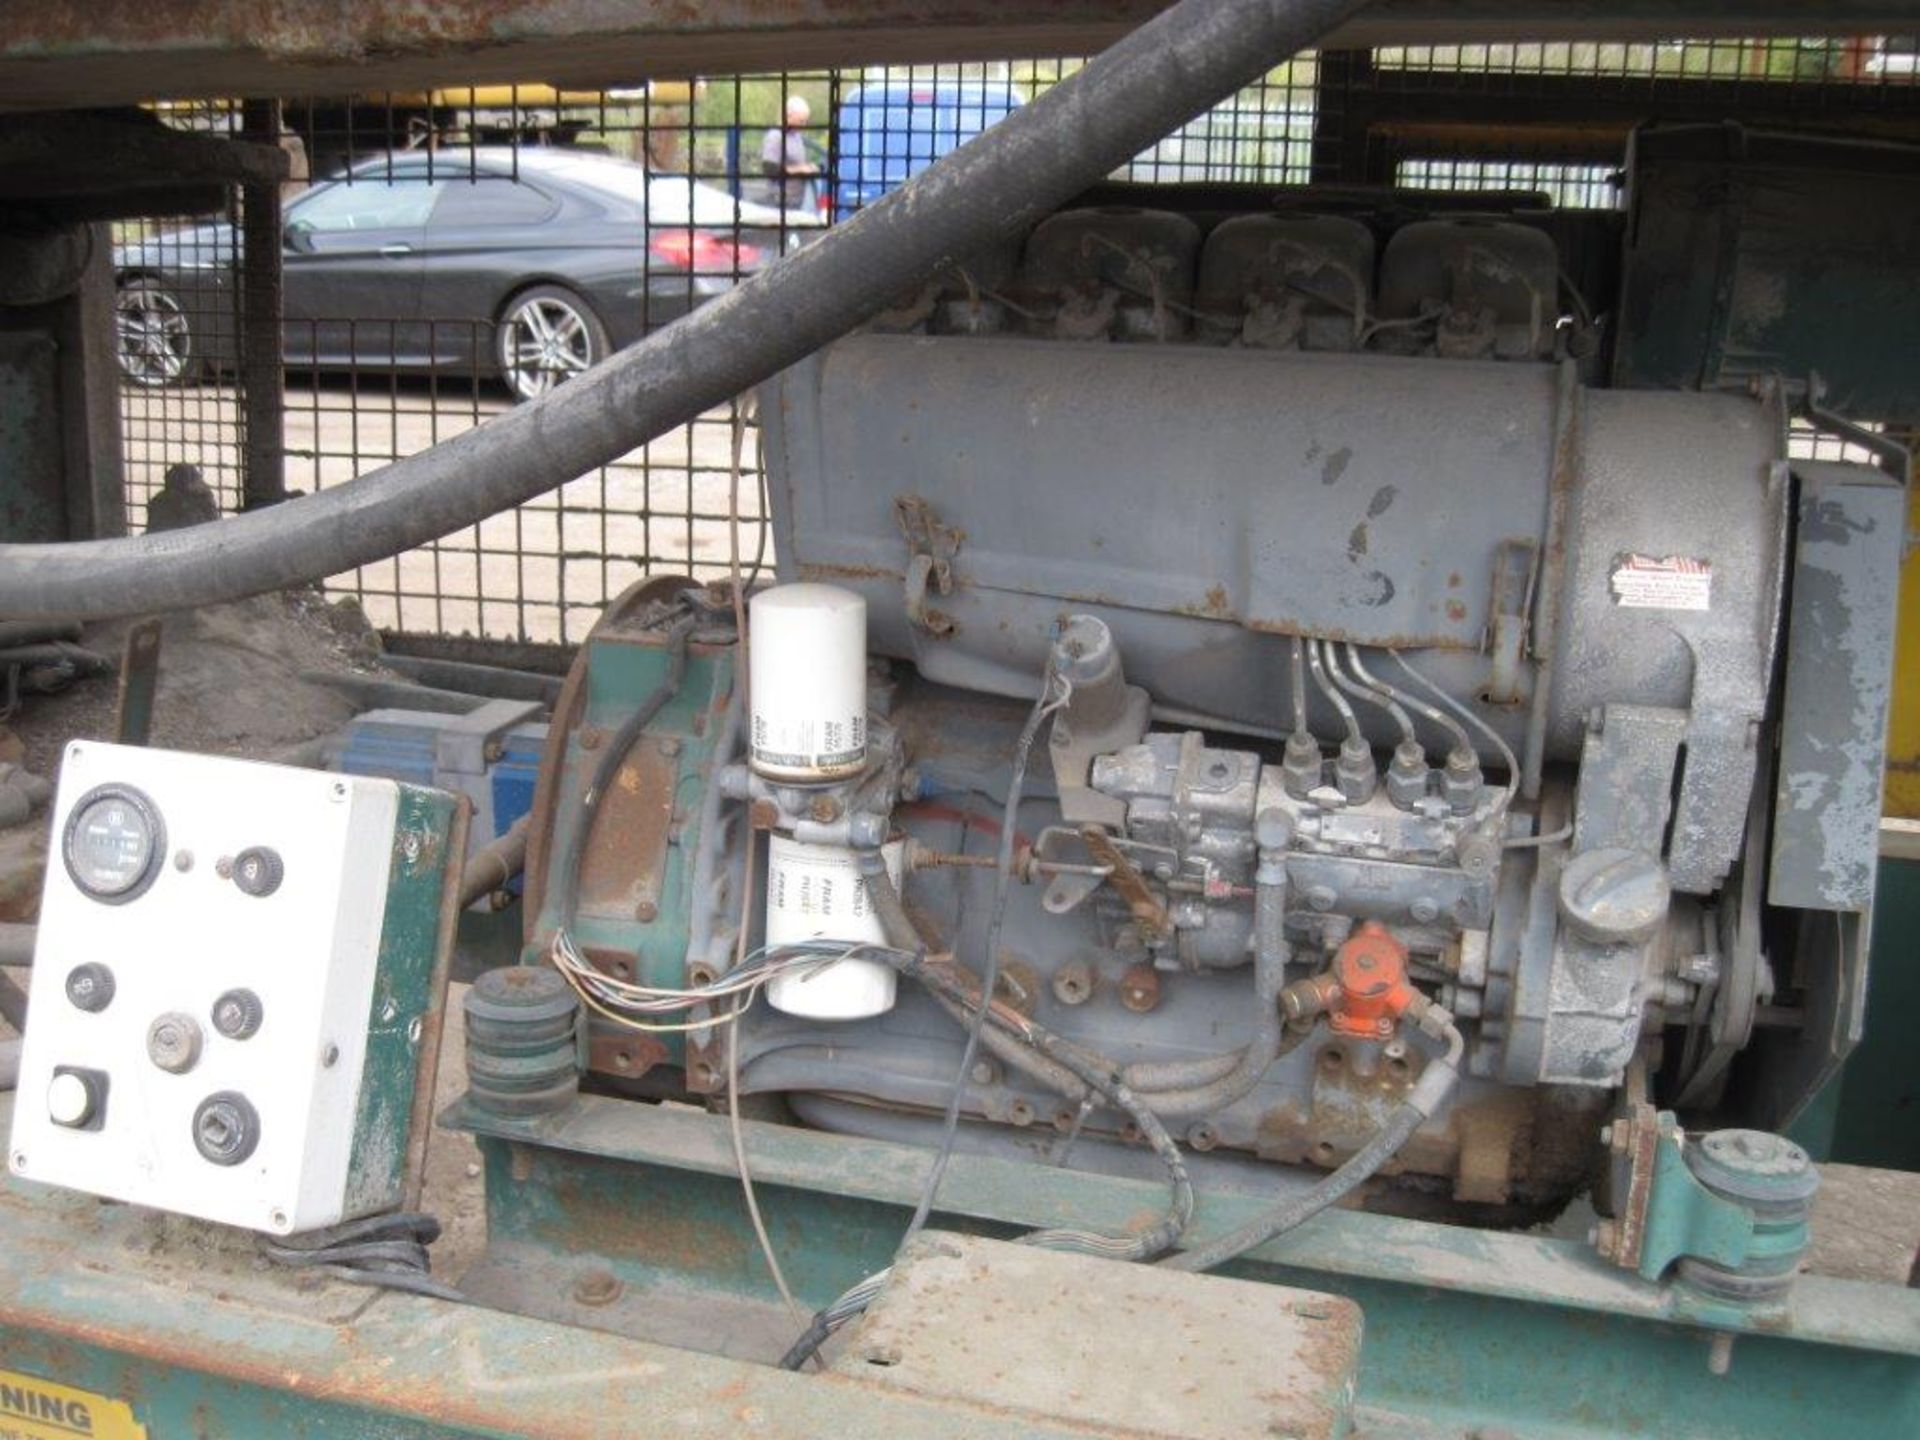 Masterskreen Conqueror Screener_x00D_
1996, deutz engine, low usage for age but couple of screens - Image 4 of 4